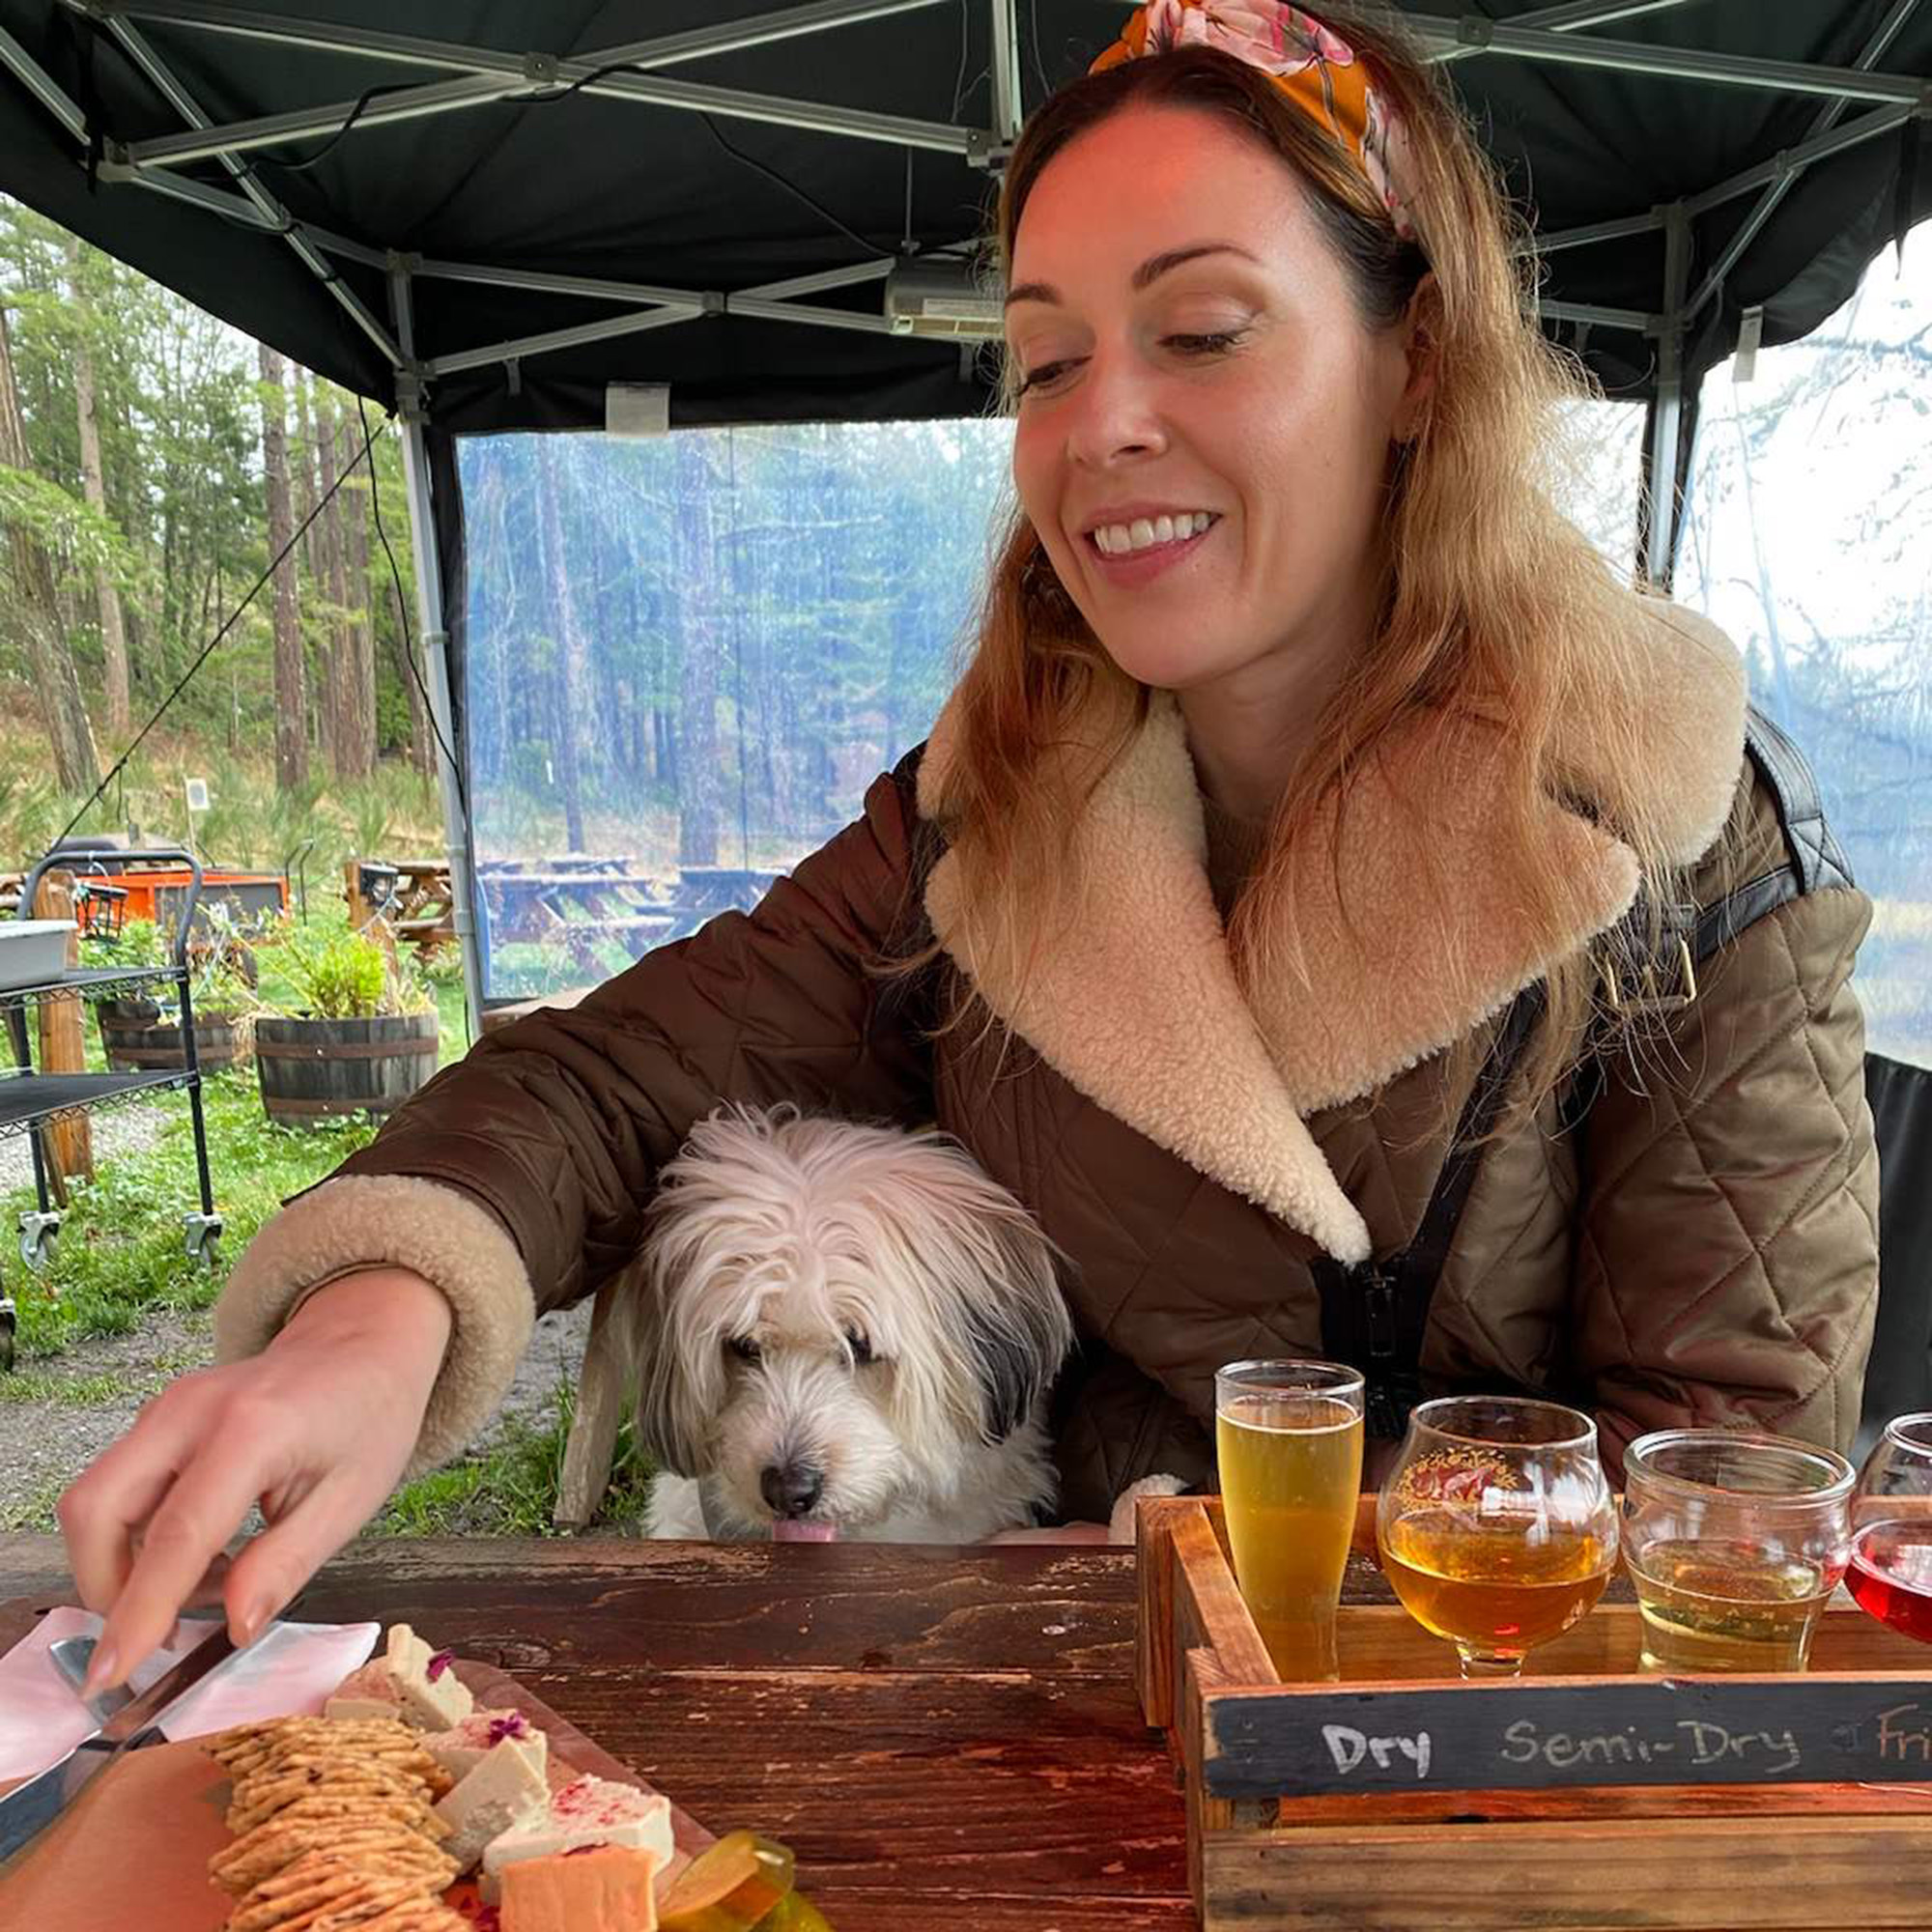 Marie and her dog at a restaurant